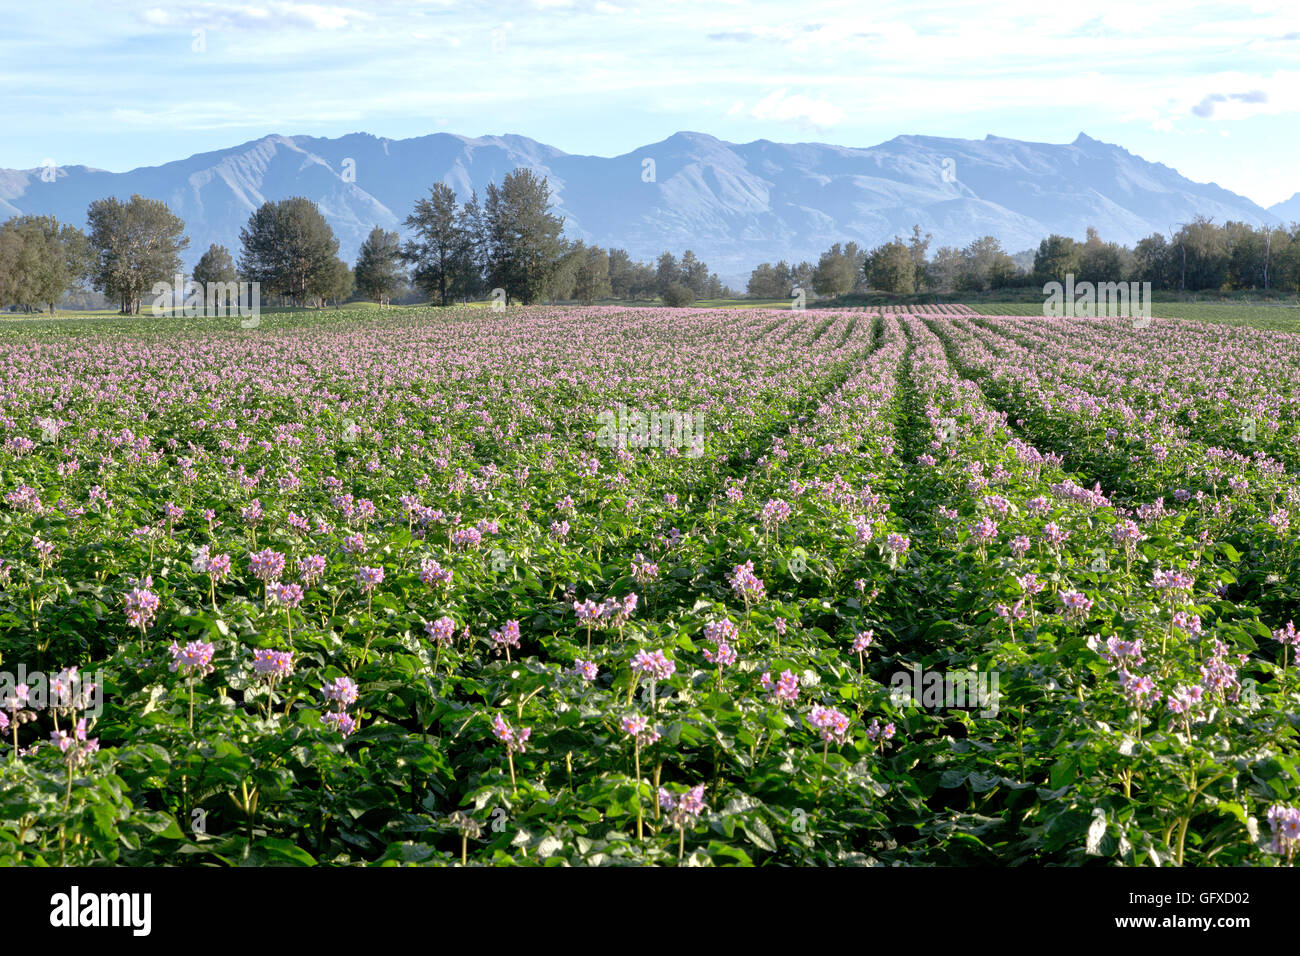 Red potato 'Chieftain' flowering field, converging rows, Chugach mountains in background. Stock Photo